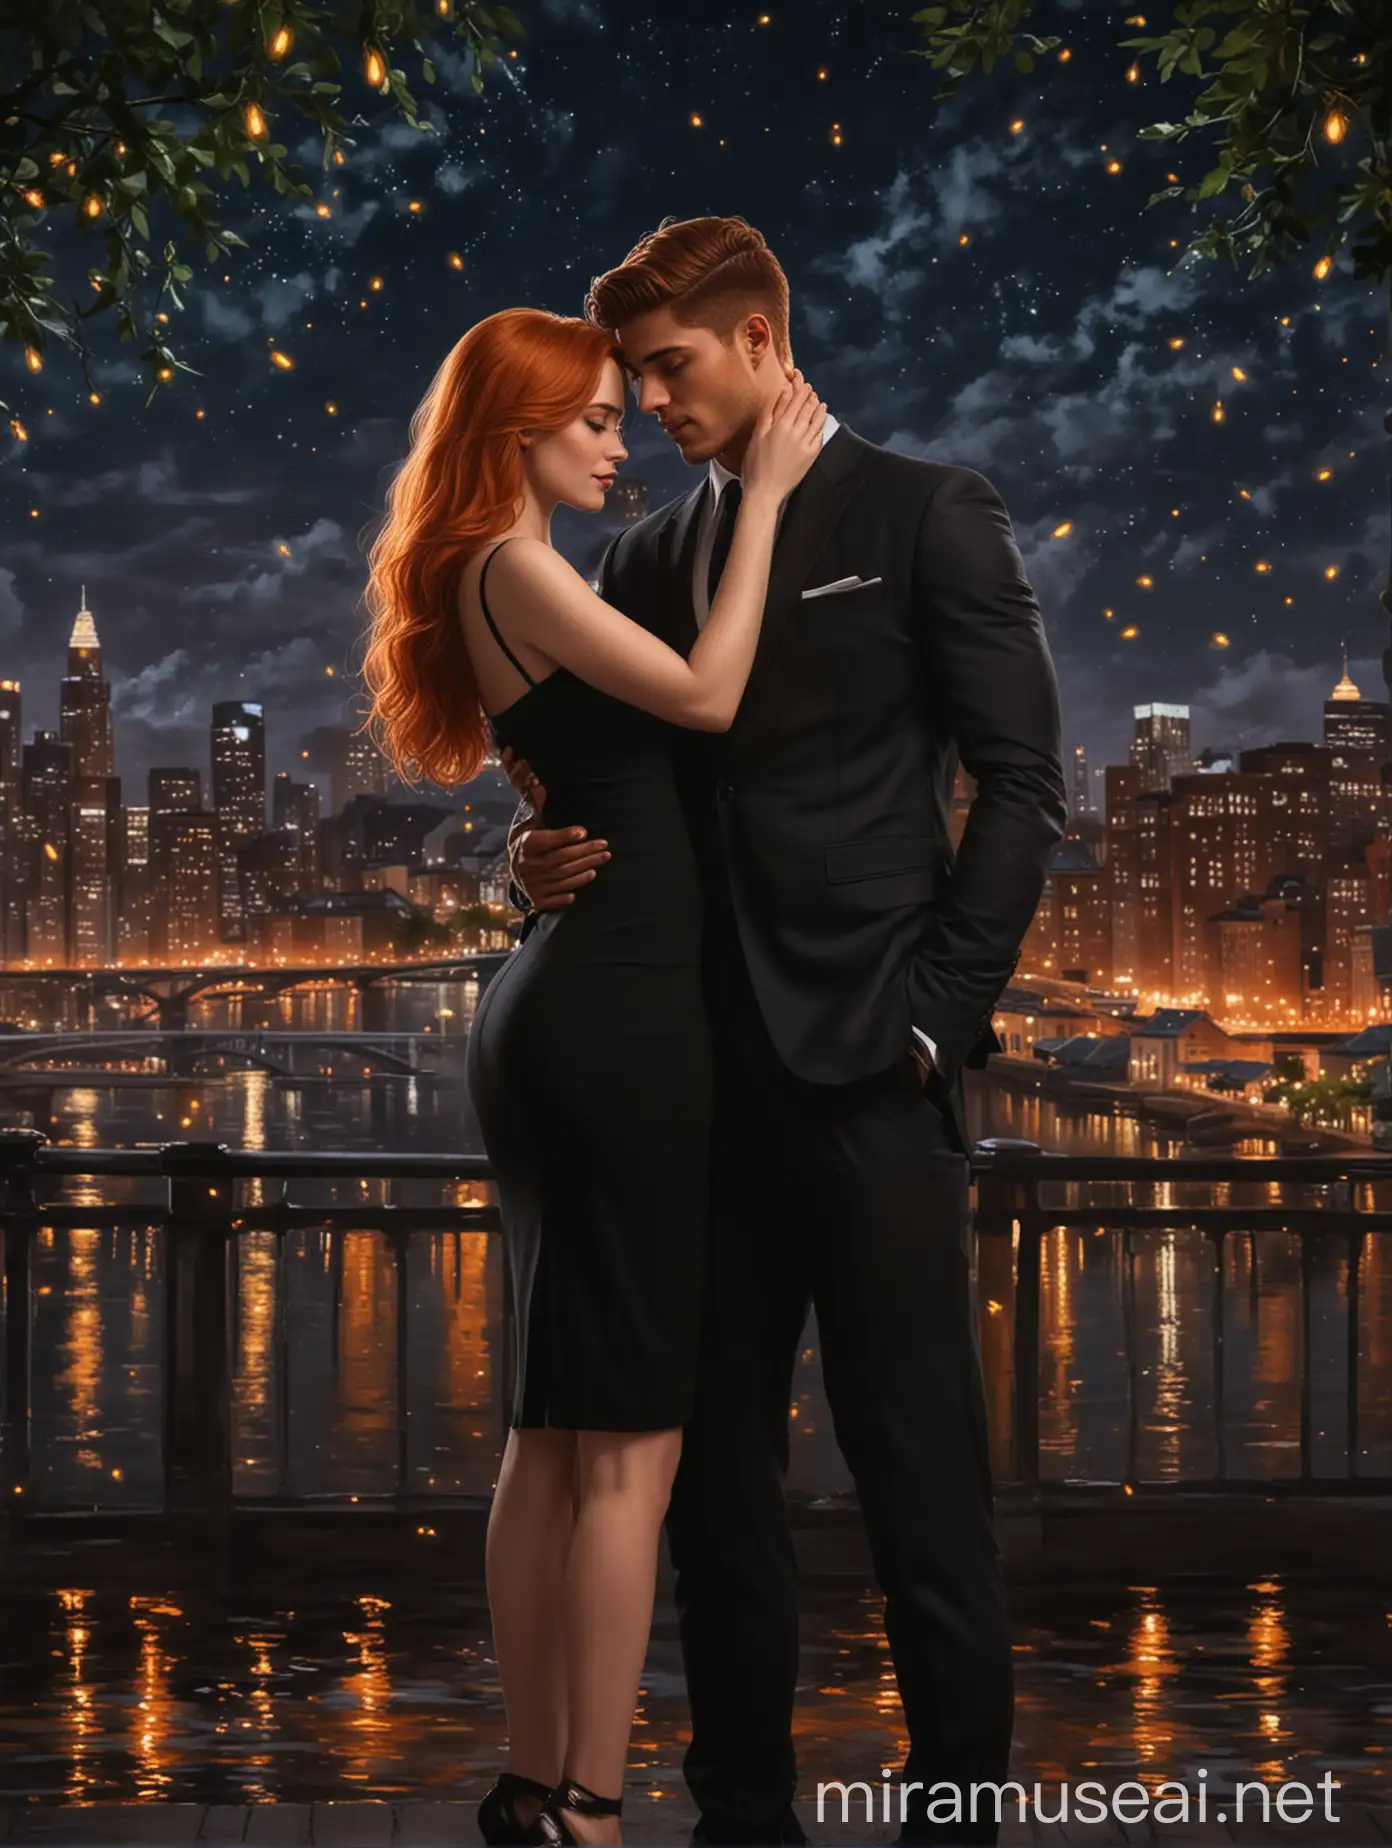 A beautiful lady with ginger color hair, putting on a beautiful fitted black dress and held romantically by a handsome young muscular man in suit having black hair, with a beautiful luminous glowing city behind them at night, and fireflies hovering around